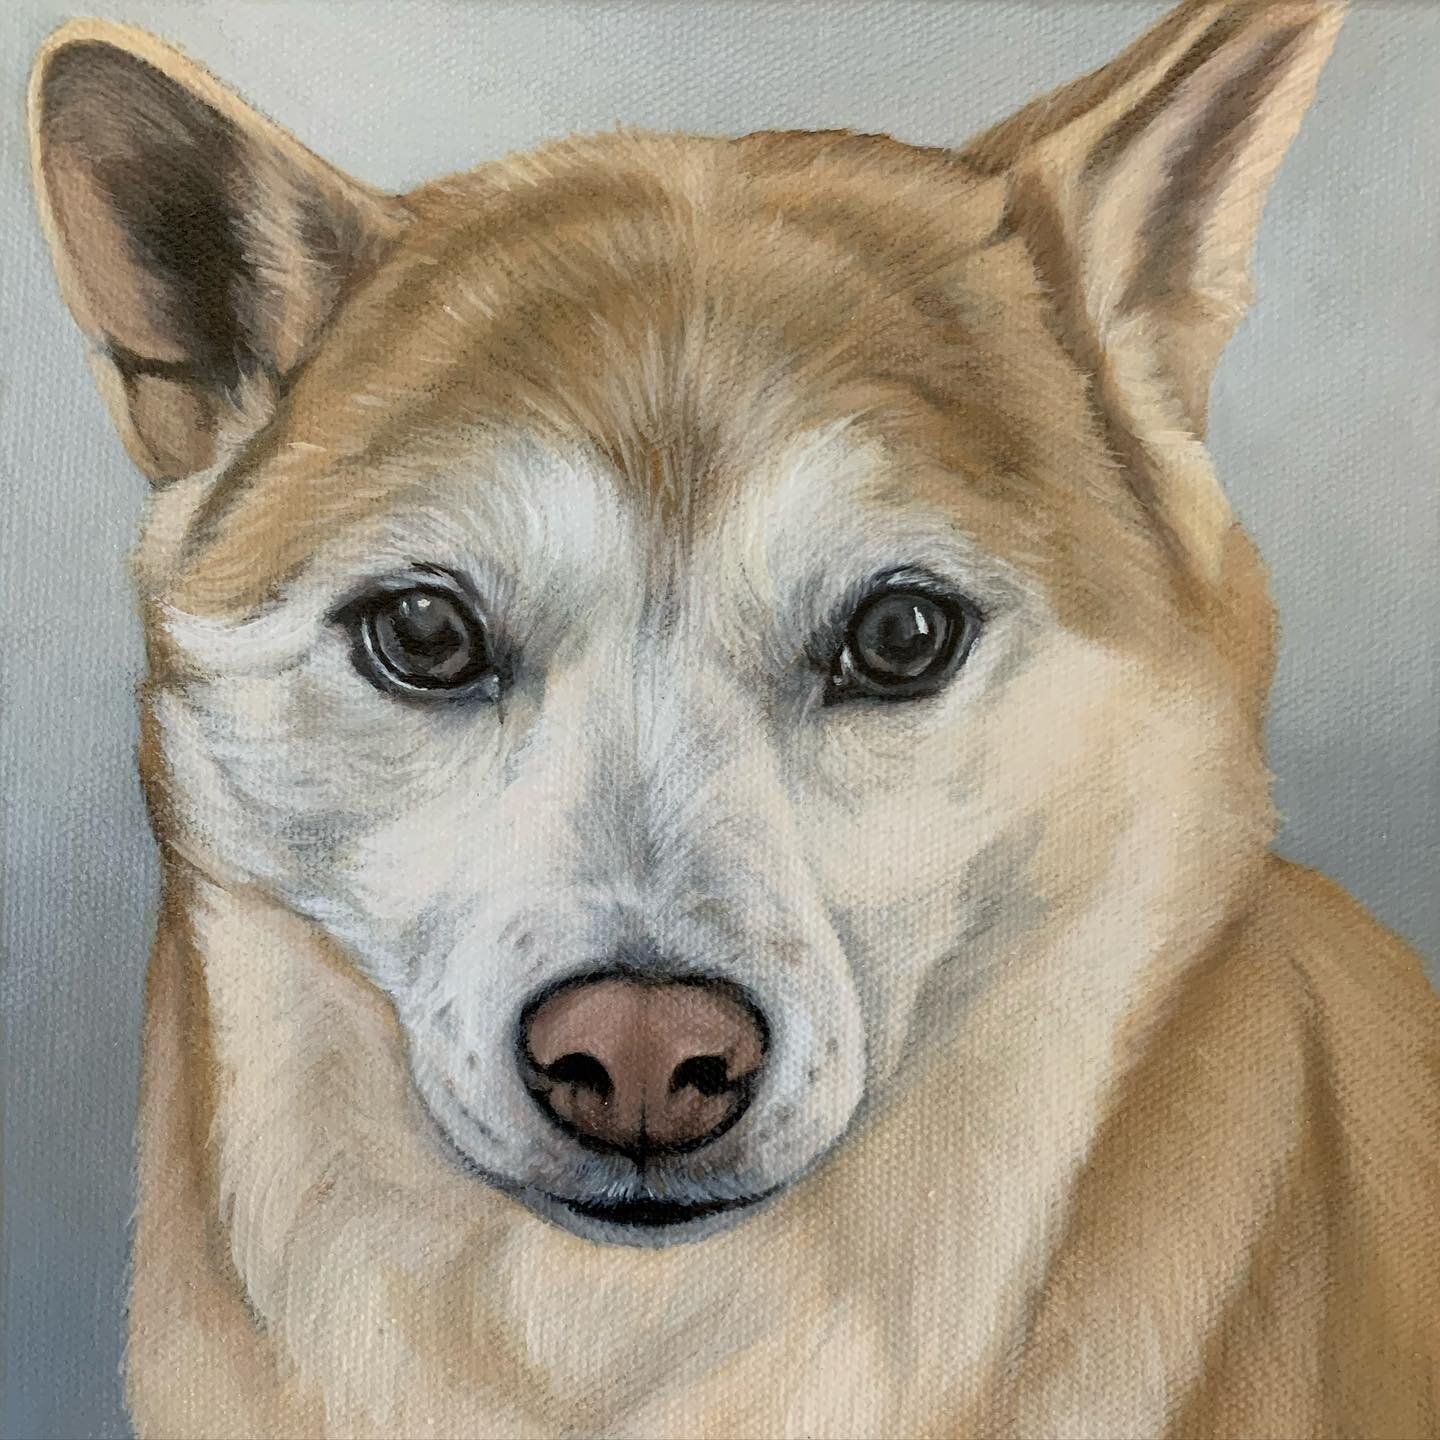 Catching up! Here is one of Foxy! Friends and the creator of my webpage, @tor_wit was gifted with a portrait from her mom-in-law to the newly weds. I hope you guys love it!

#firstchristmasmarried #petportrait #uniquegifts #shibainu #shibastagram #sh